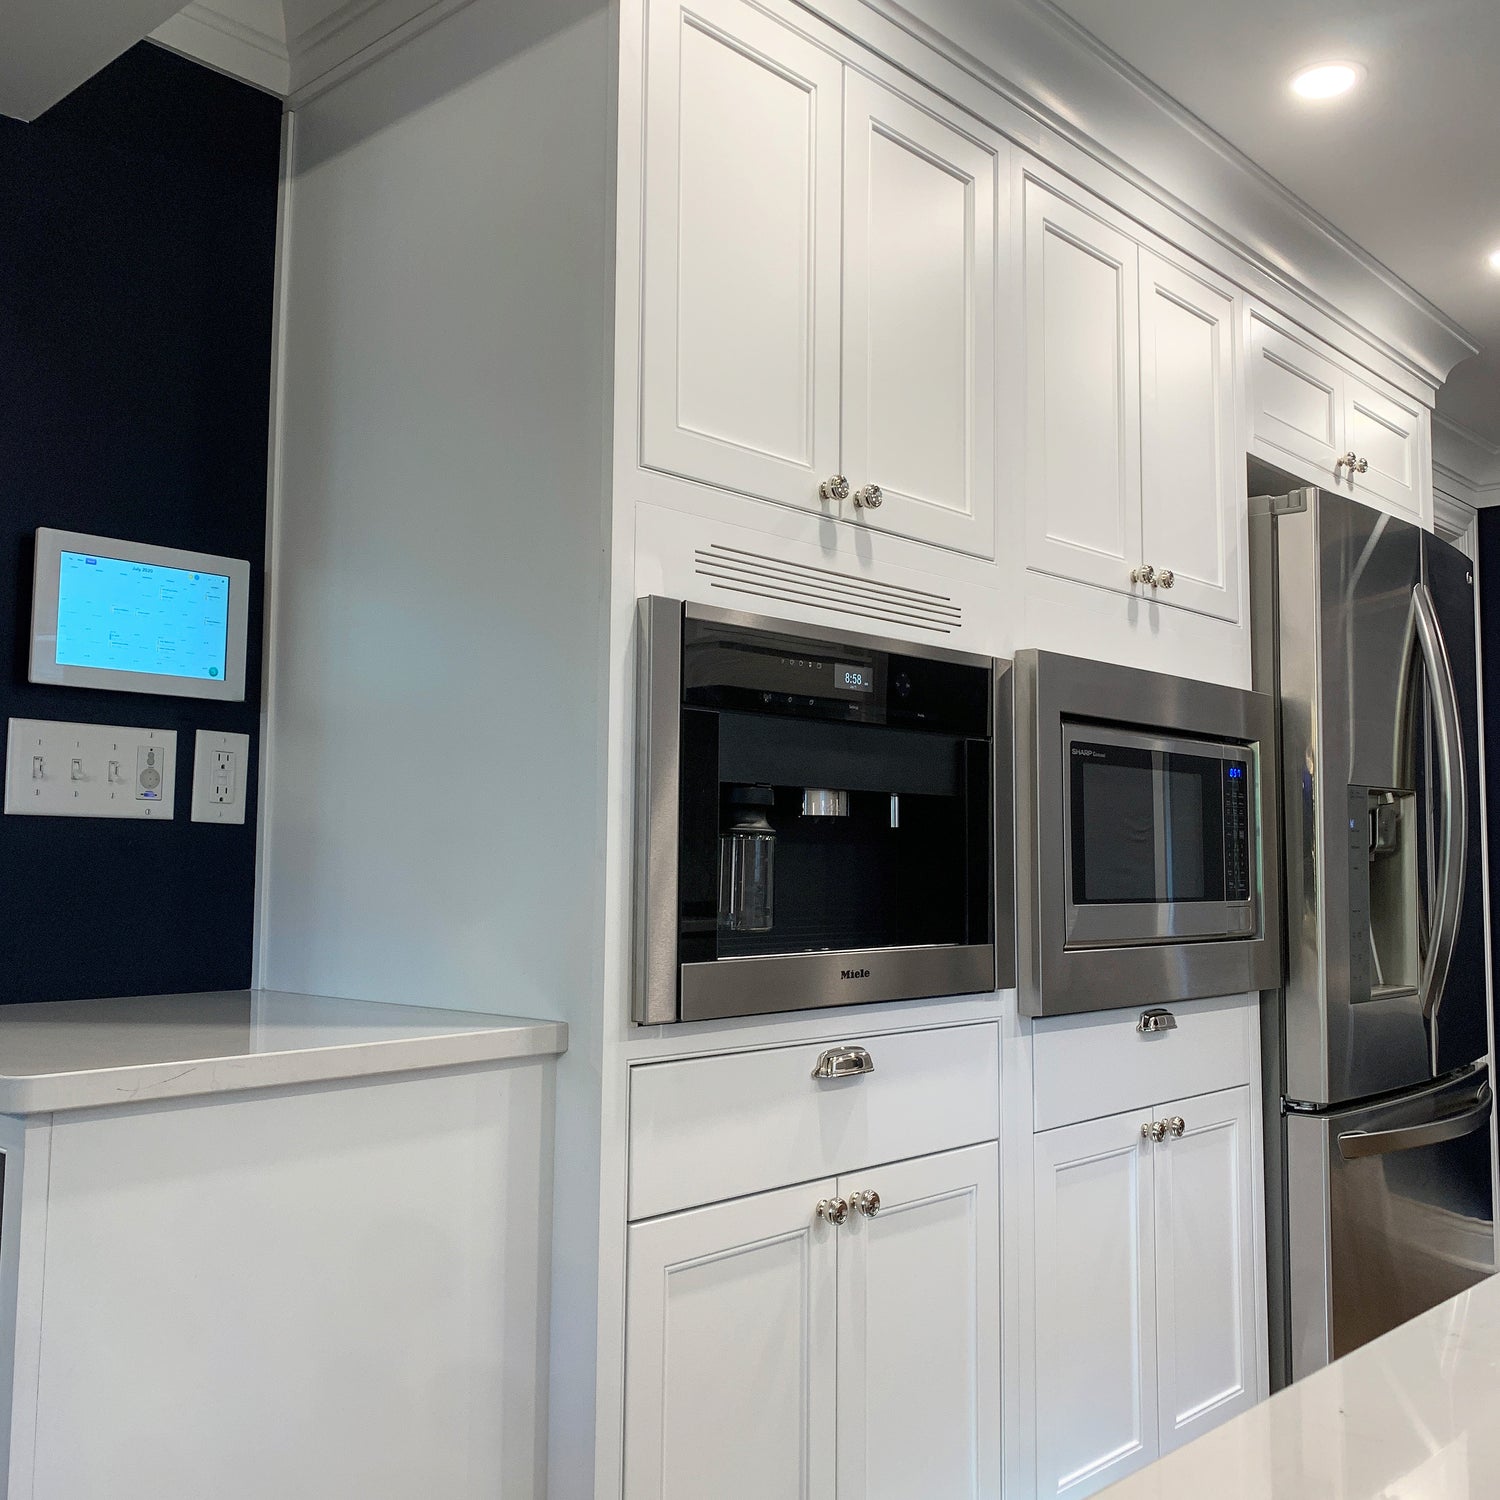 custom kitchen cabinets, trim and crown molding